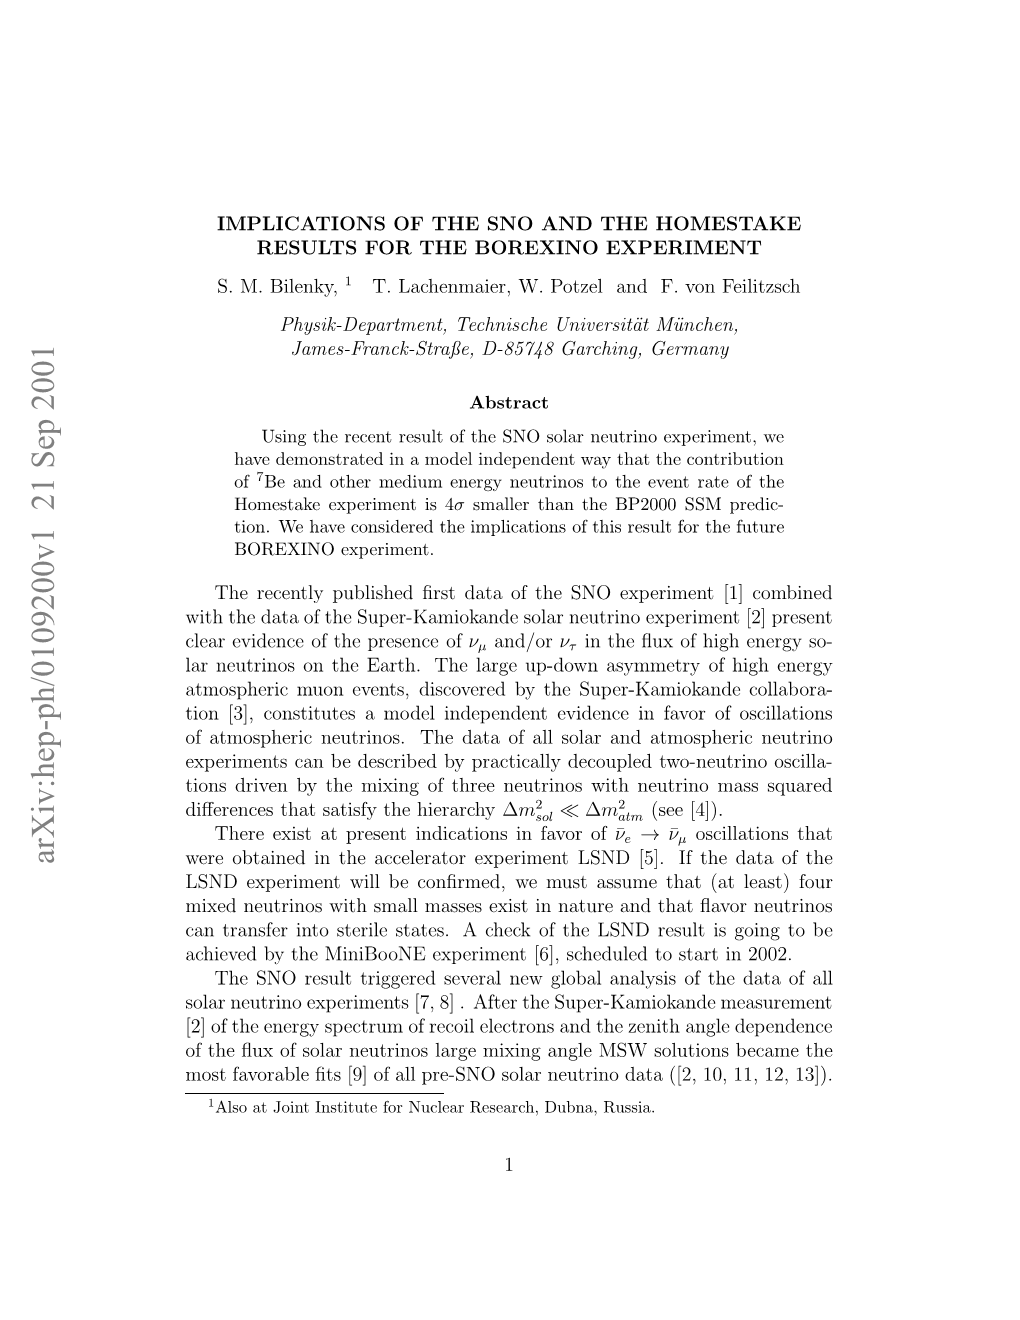 Implications of the SNO and the Homestake Results for the BOREXINO Experiment